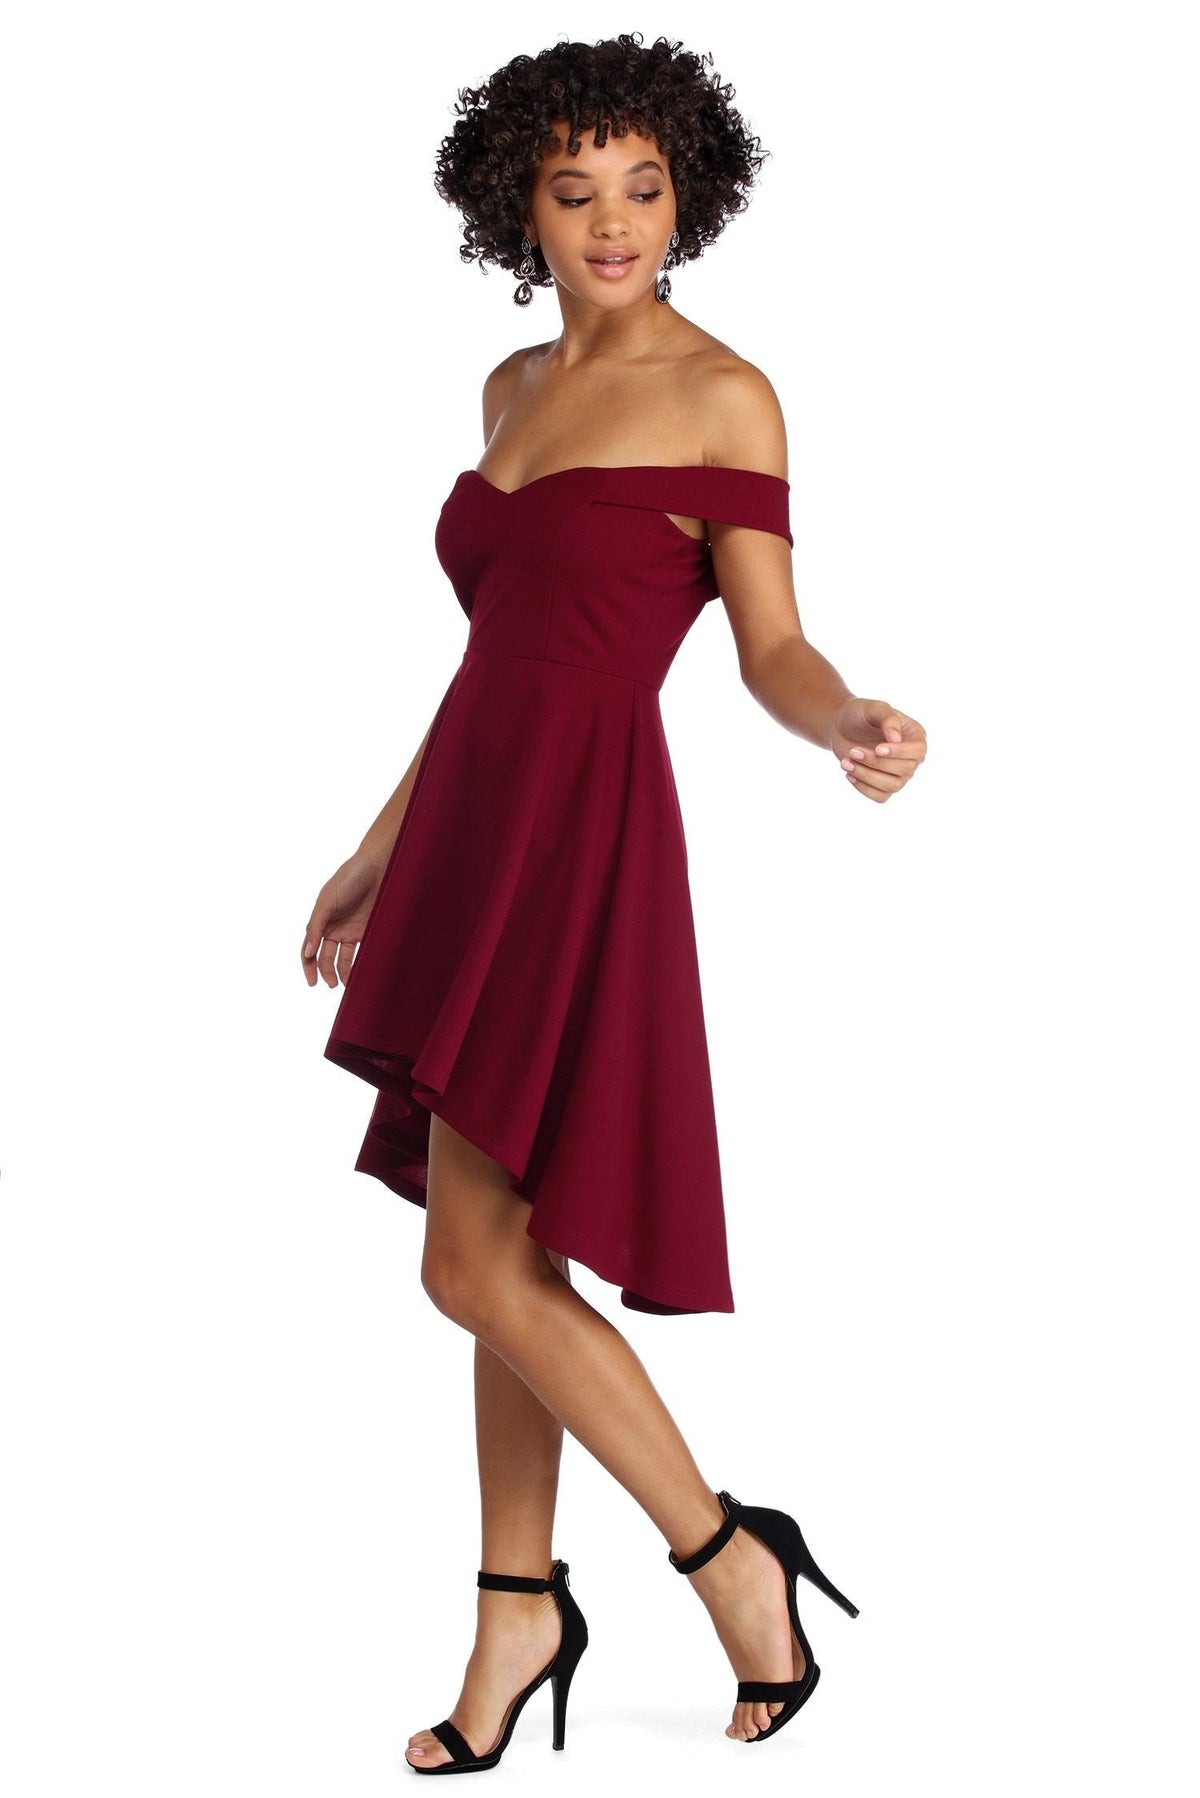 Make It Sweet Skater Dress - Lady Occasions